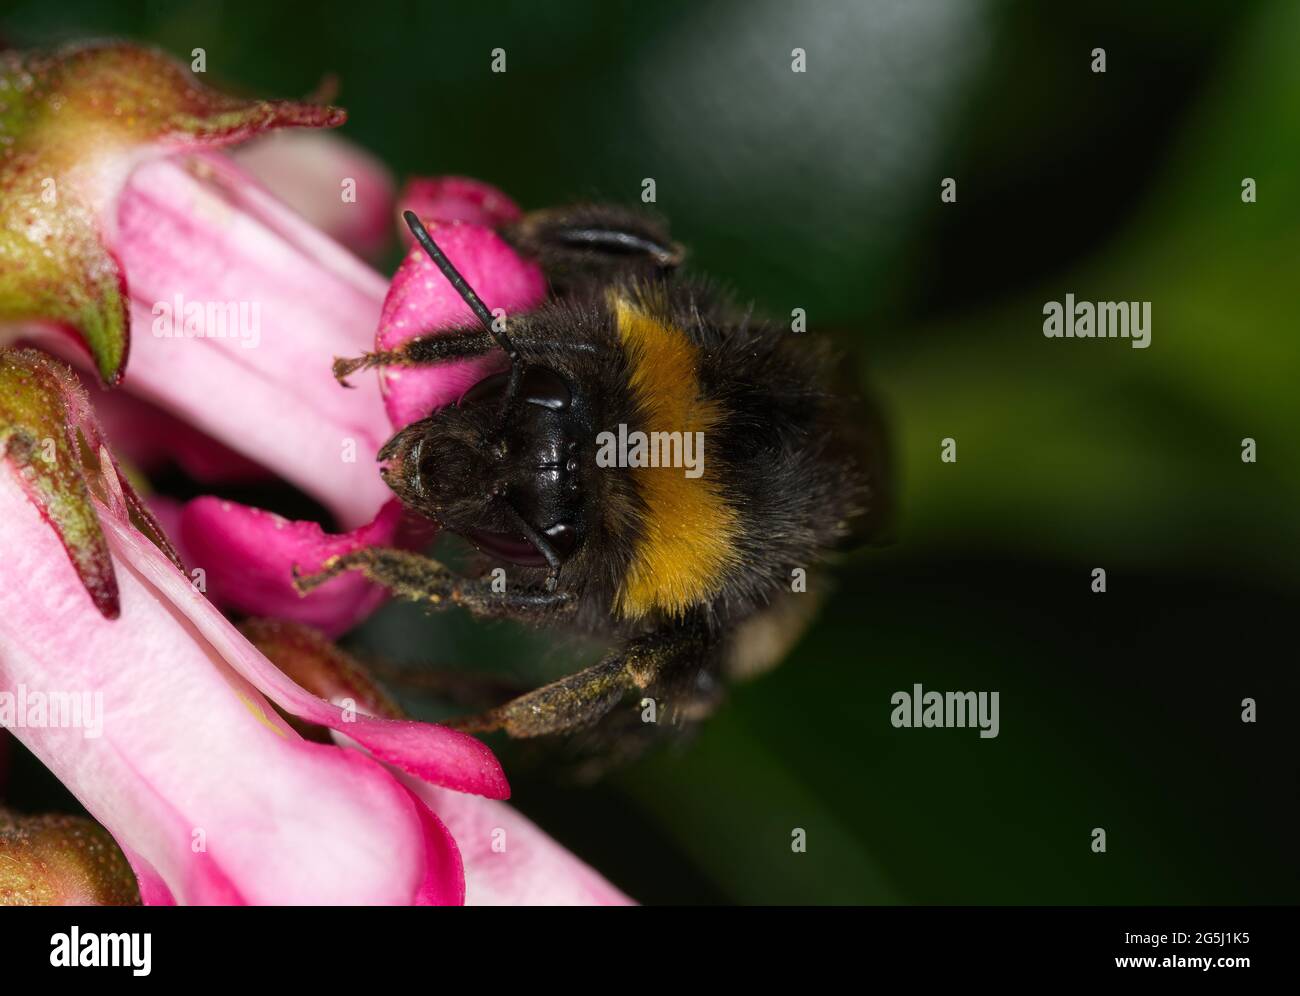 close up of bumble bee on flower Stock Photo